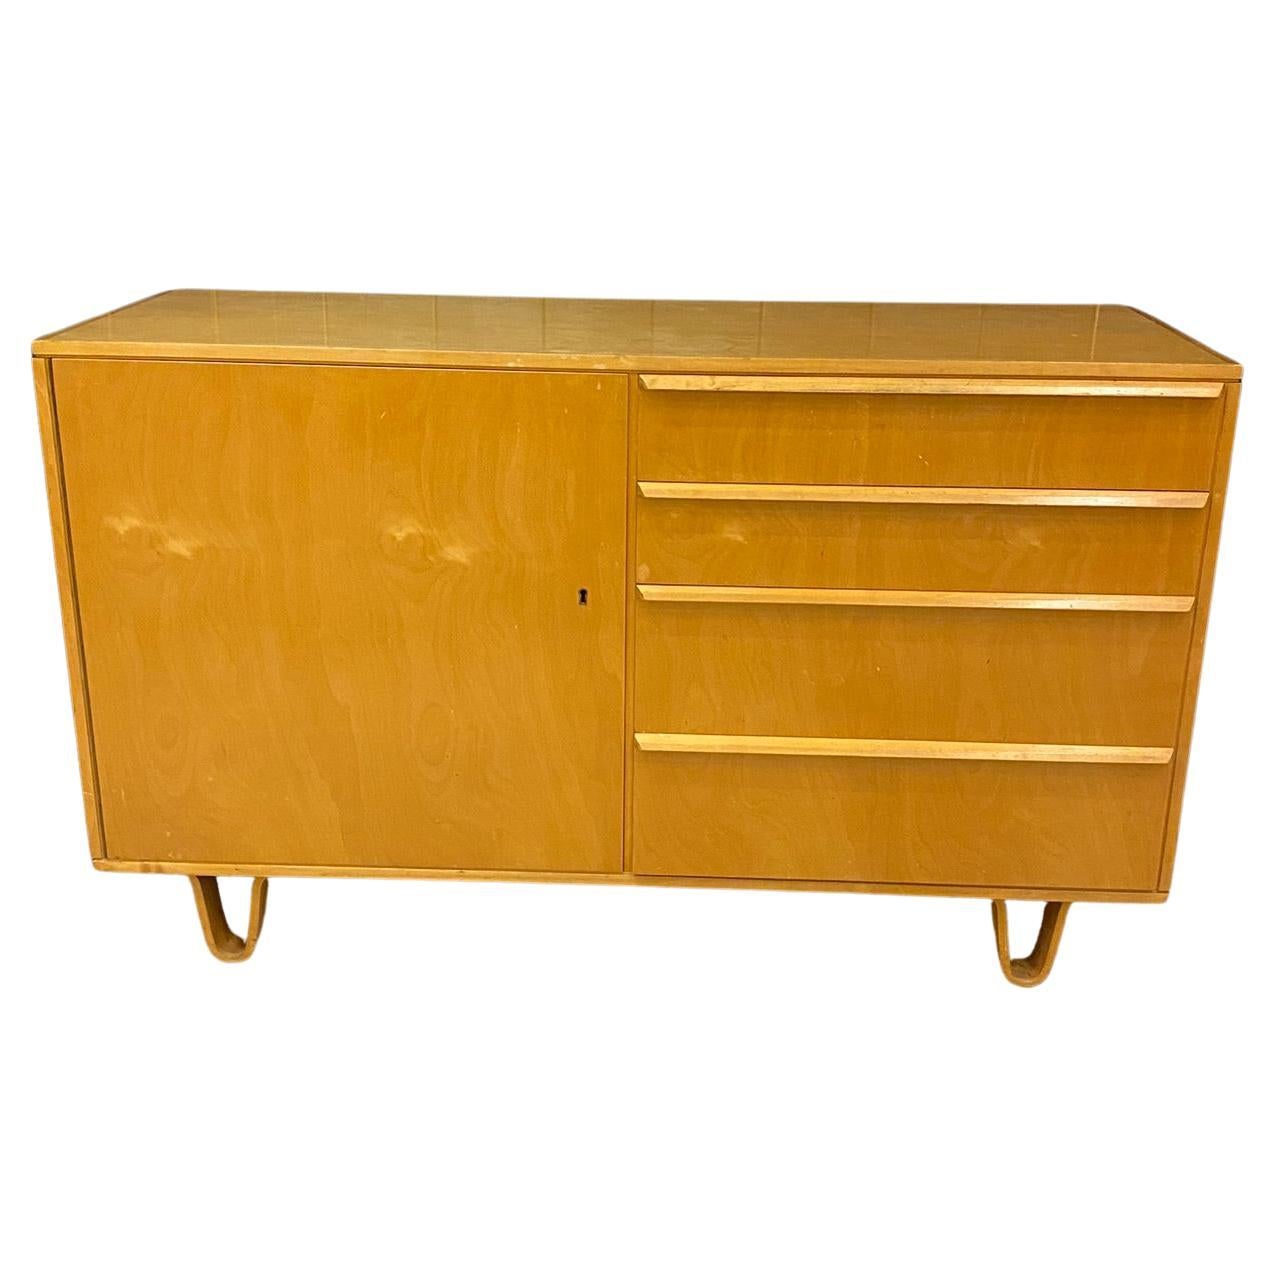 Cees Braackman for Editions Pastoe Small Sideboard, circa 1950